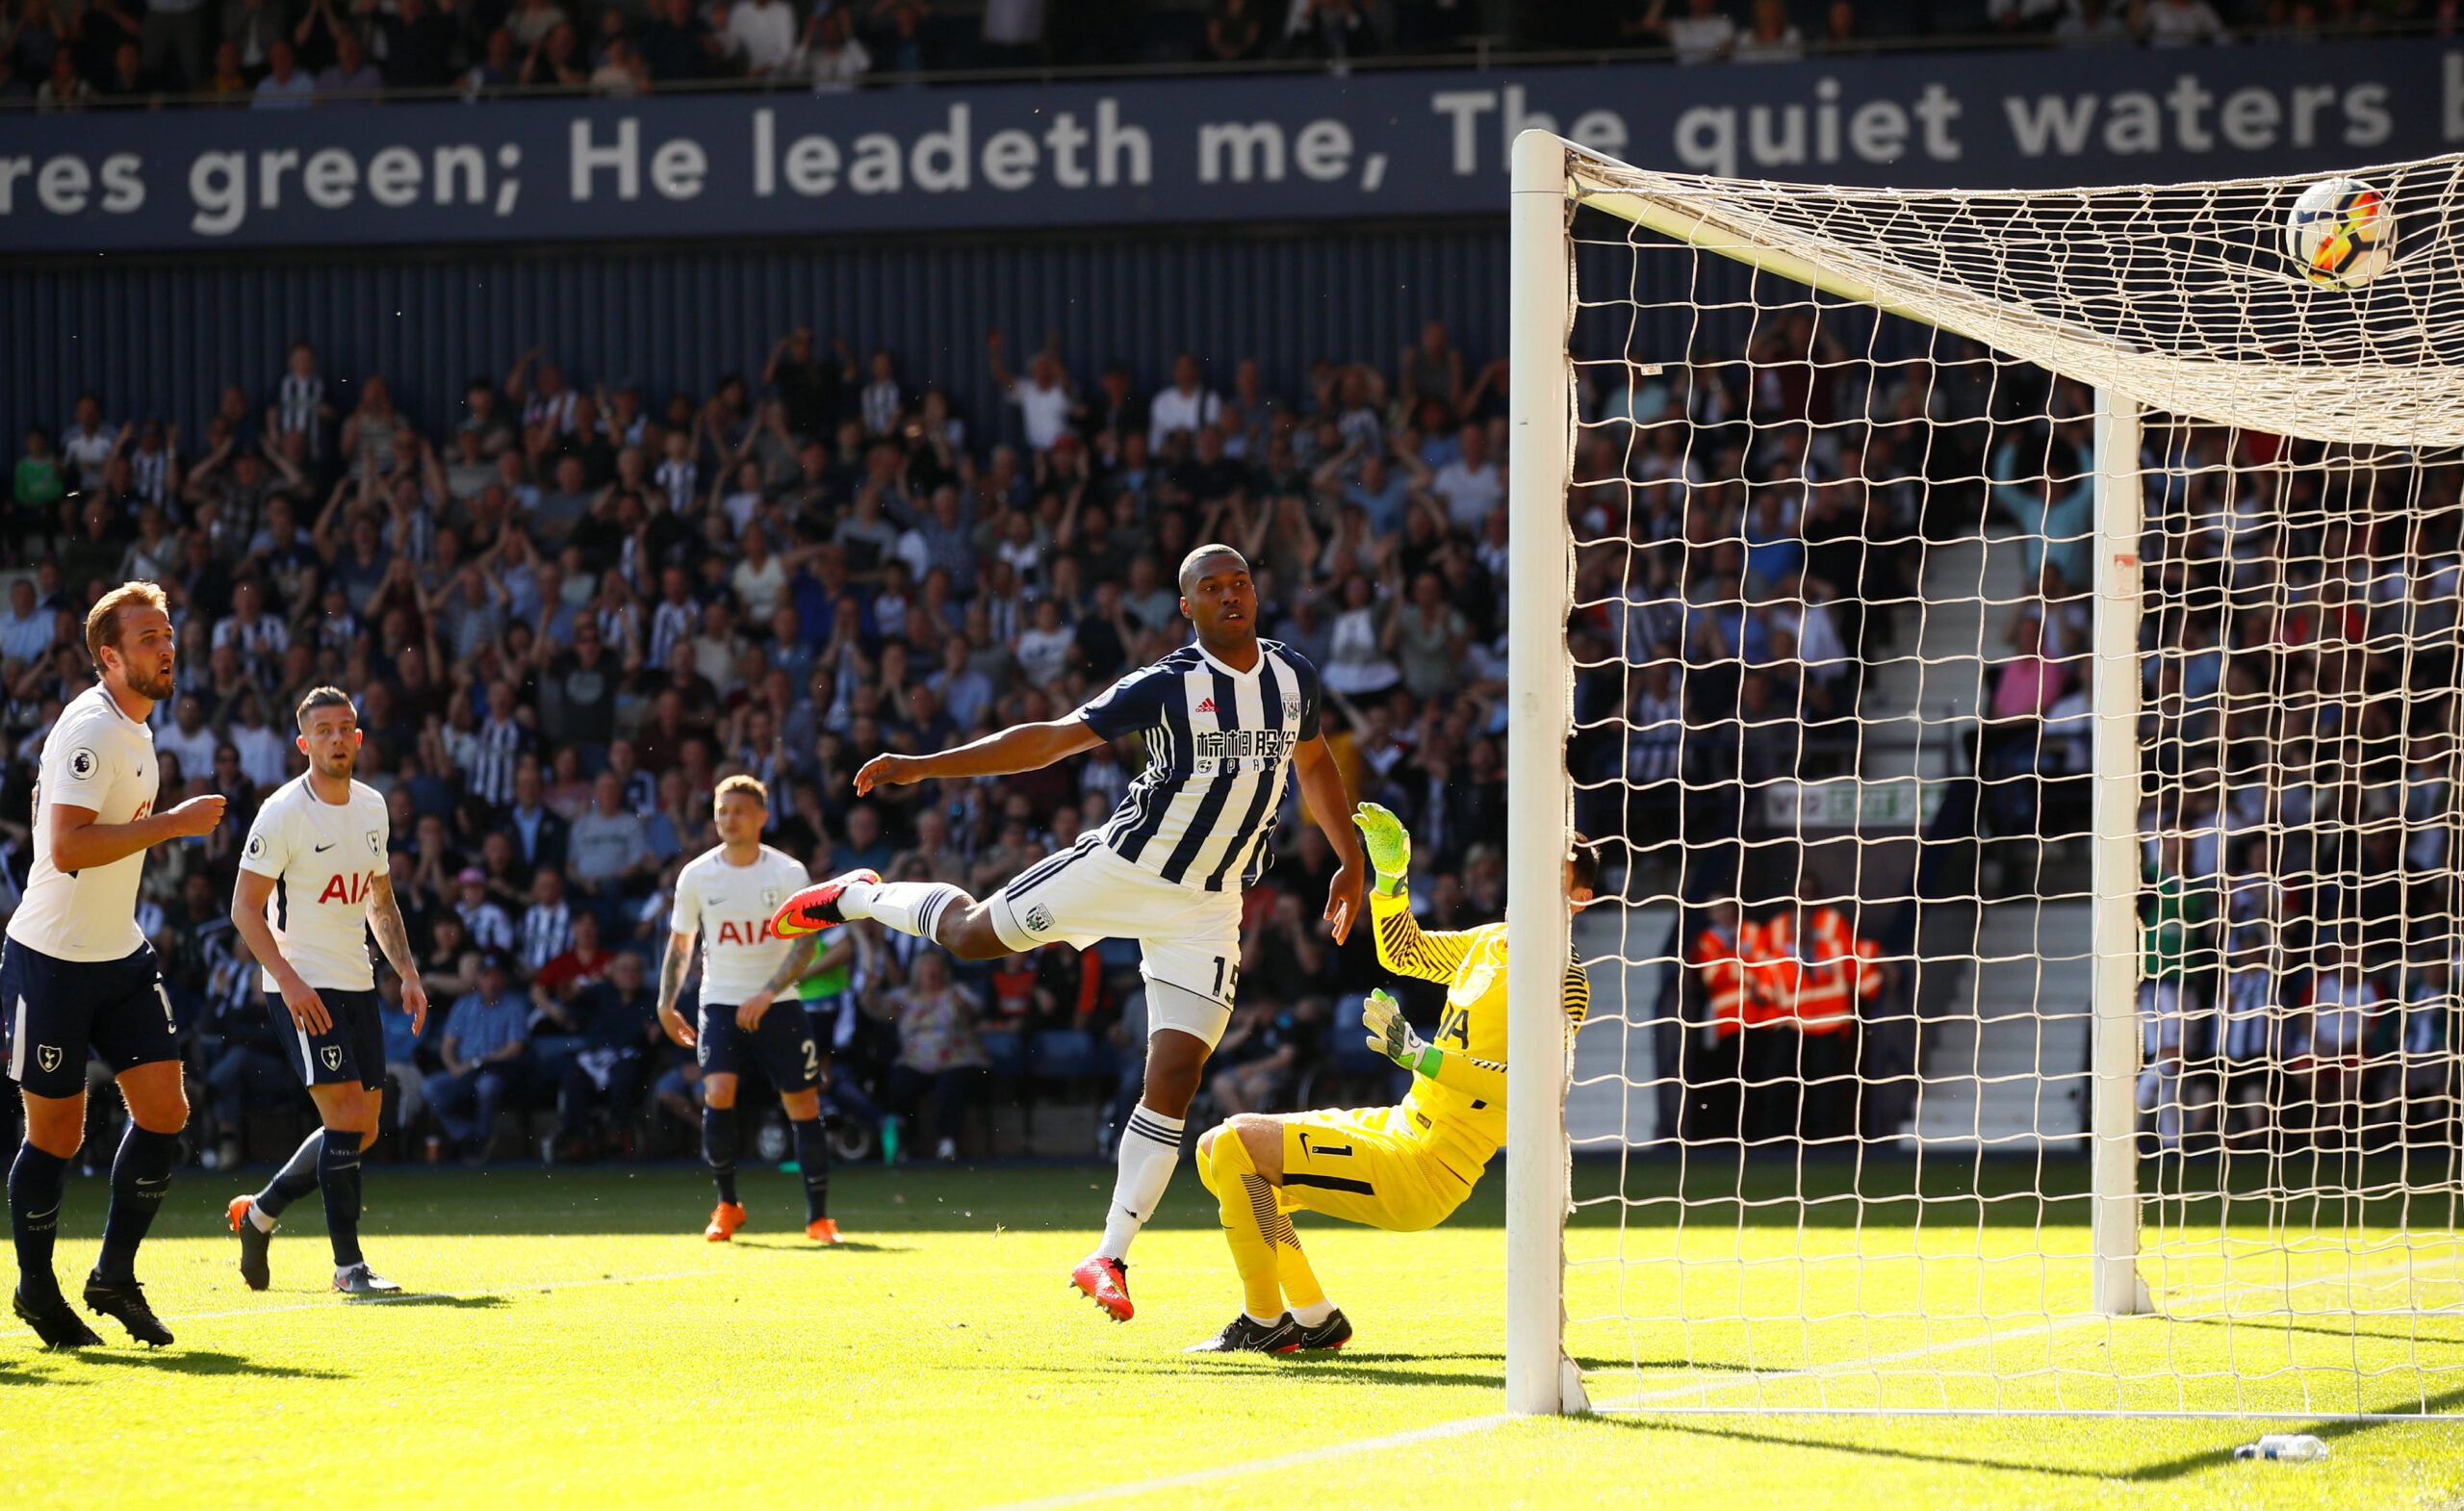 Soccer Football - Premier League - West Bromwich Albion vs Tottenham Hotspur - The Hawthorns, West Bromwich, Britain - May 5, 2018   West Bromwich Albion's Daniel Sturridge looks on           Action Images via Reuters/Jason Cairnduff    EDITORIAL USE ONLY. No use with unauthorized audio, video, data, fixture lists, club/league logos or 